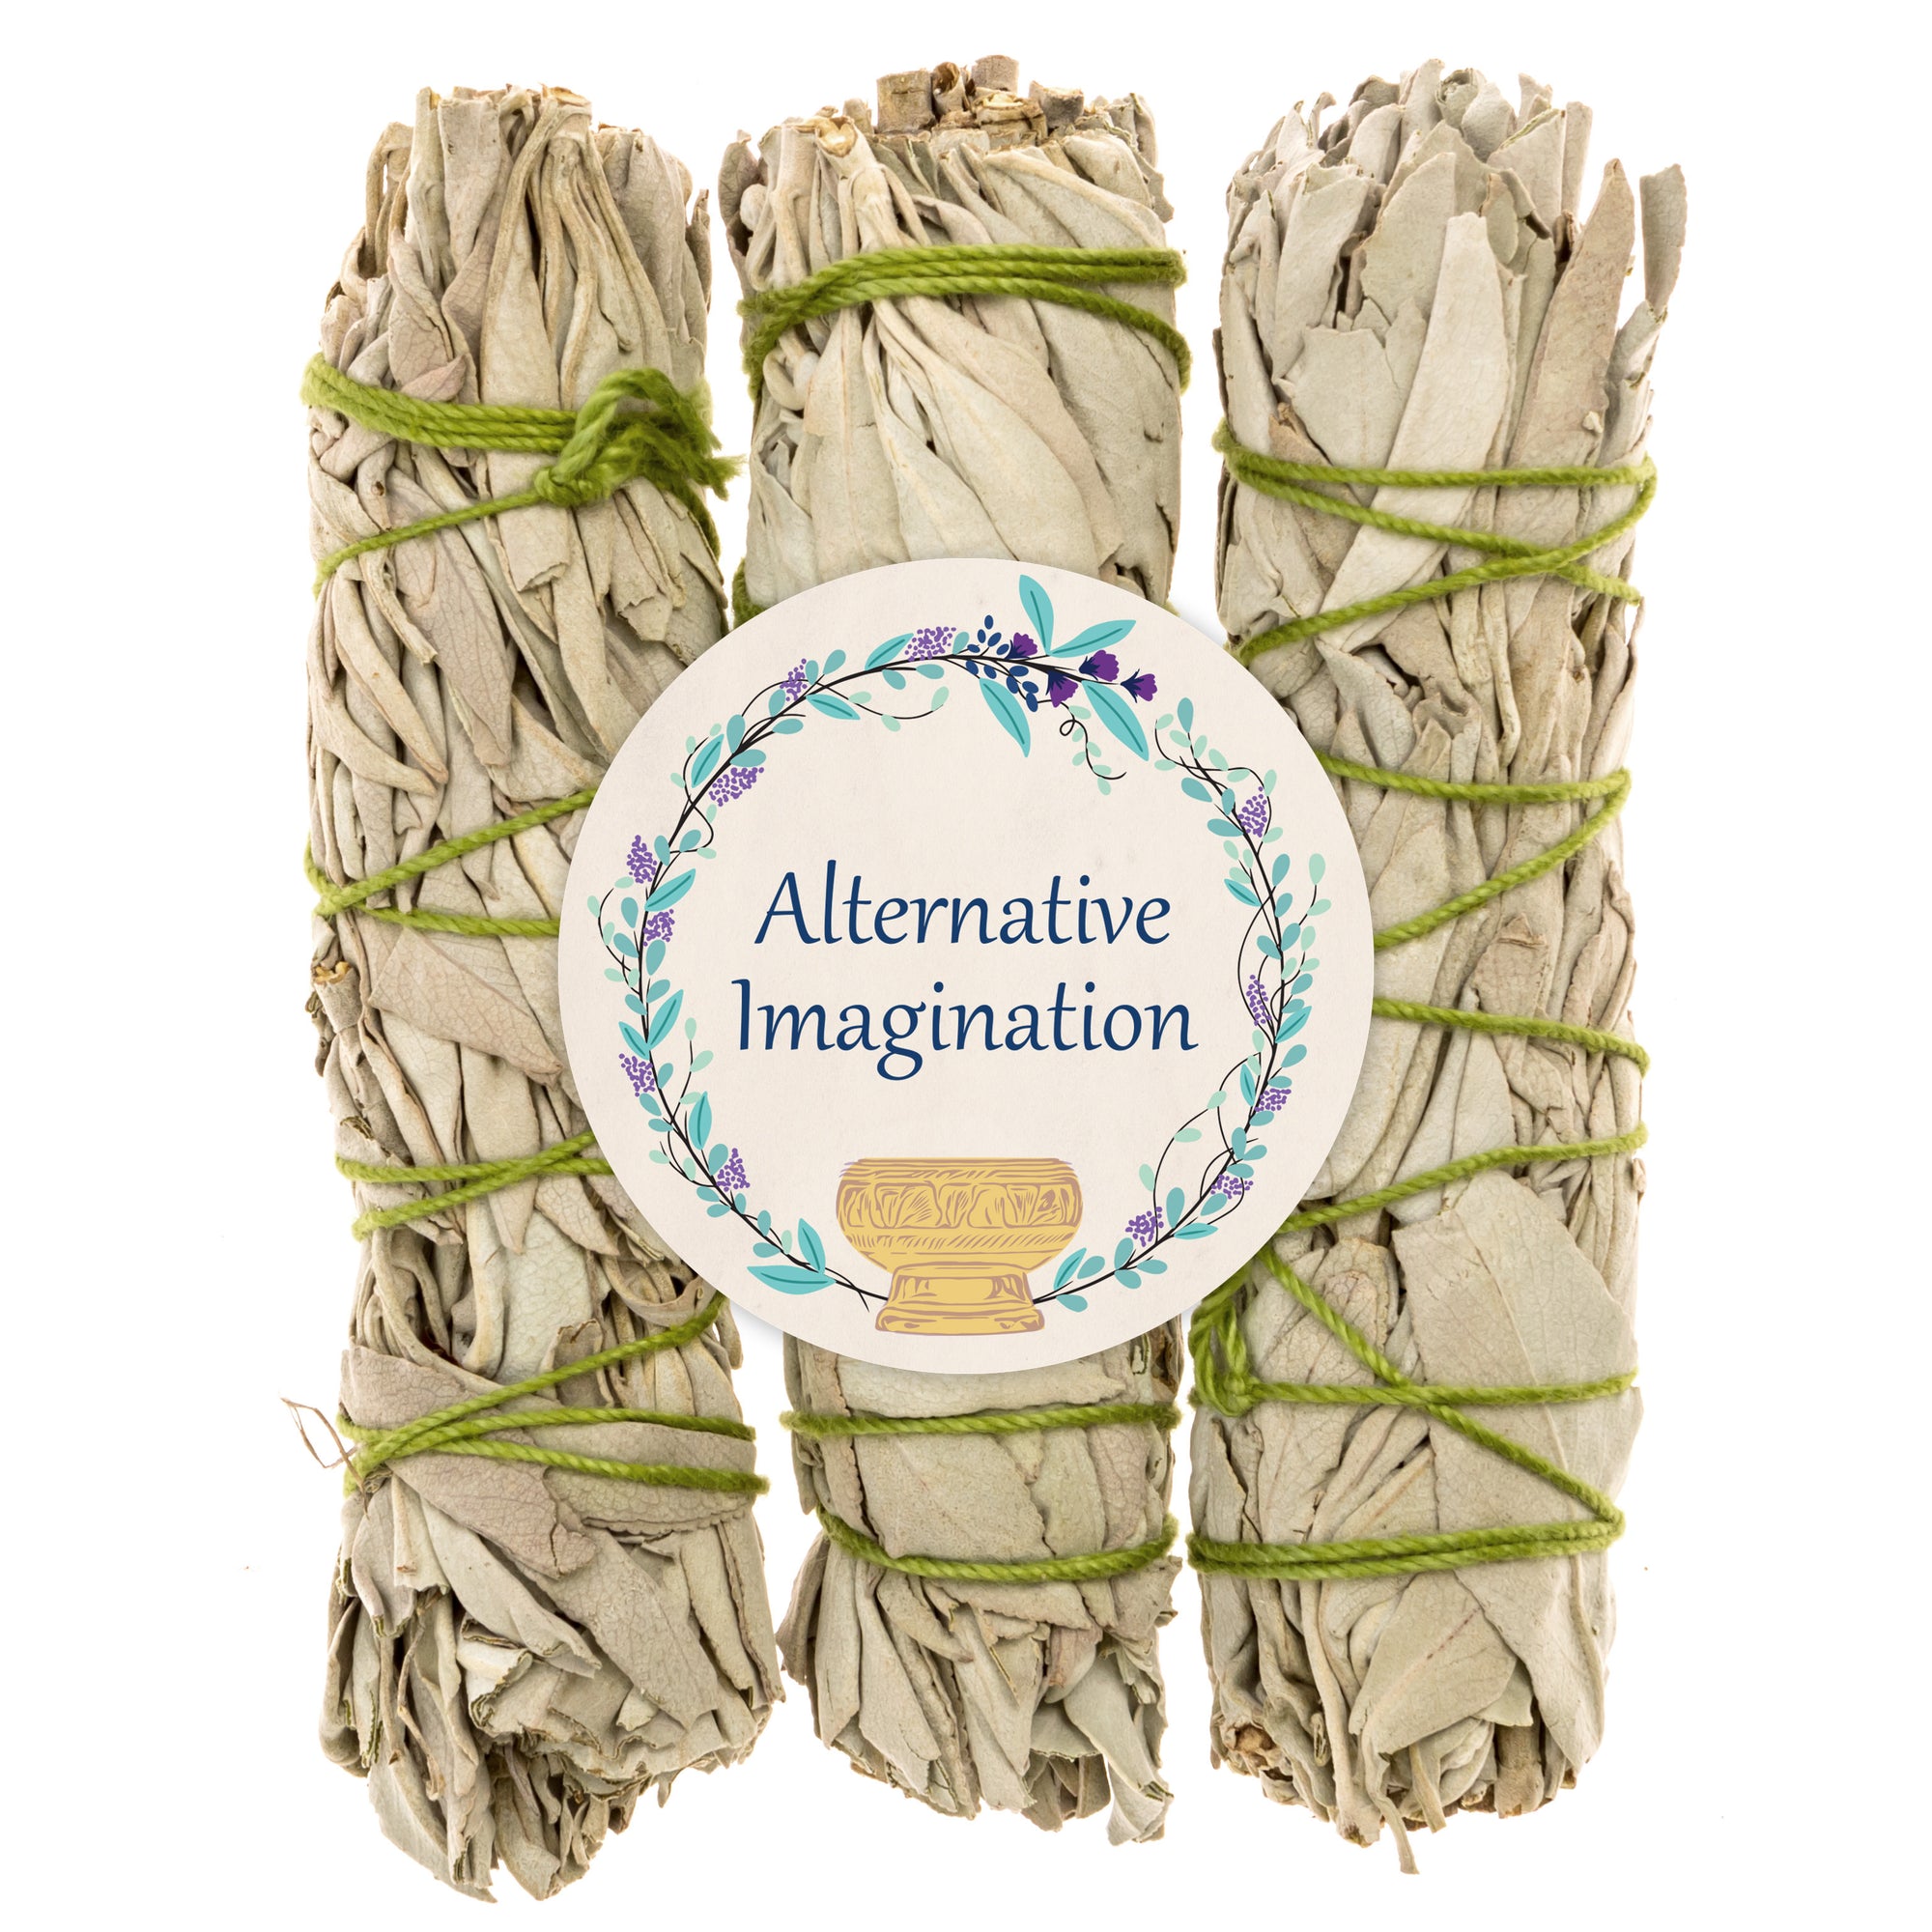 Premium California White Sage 4 Inch Smudge Sticks - 3 Pack For Home Cleansing, Fragrance, Meditation, Smudging Rituals. Packaged with Care in the USA